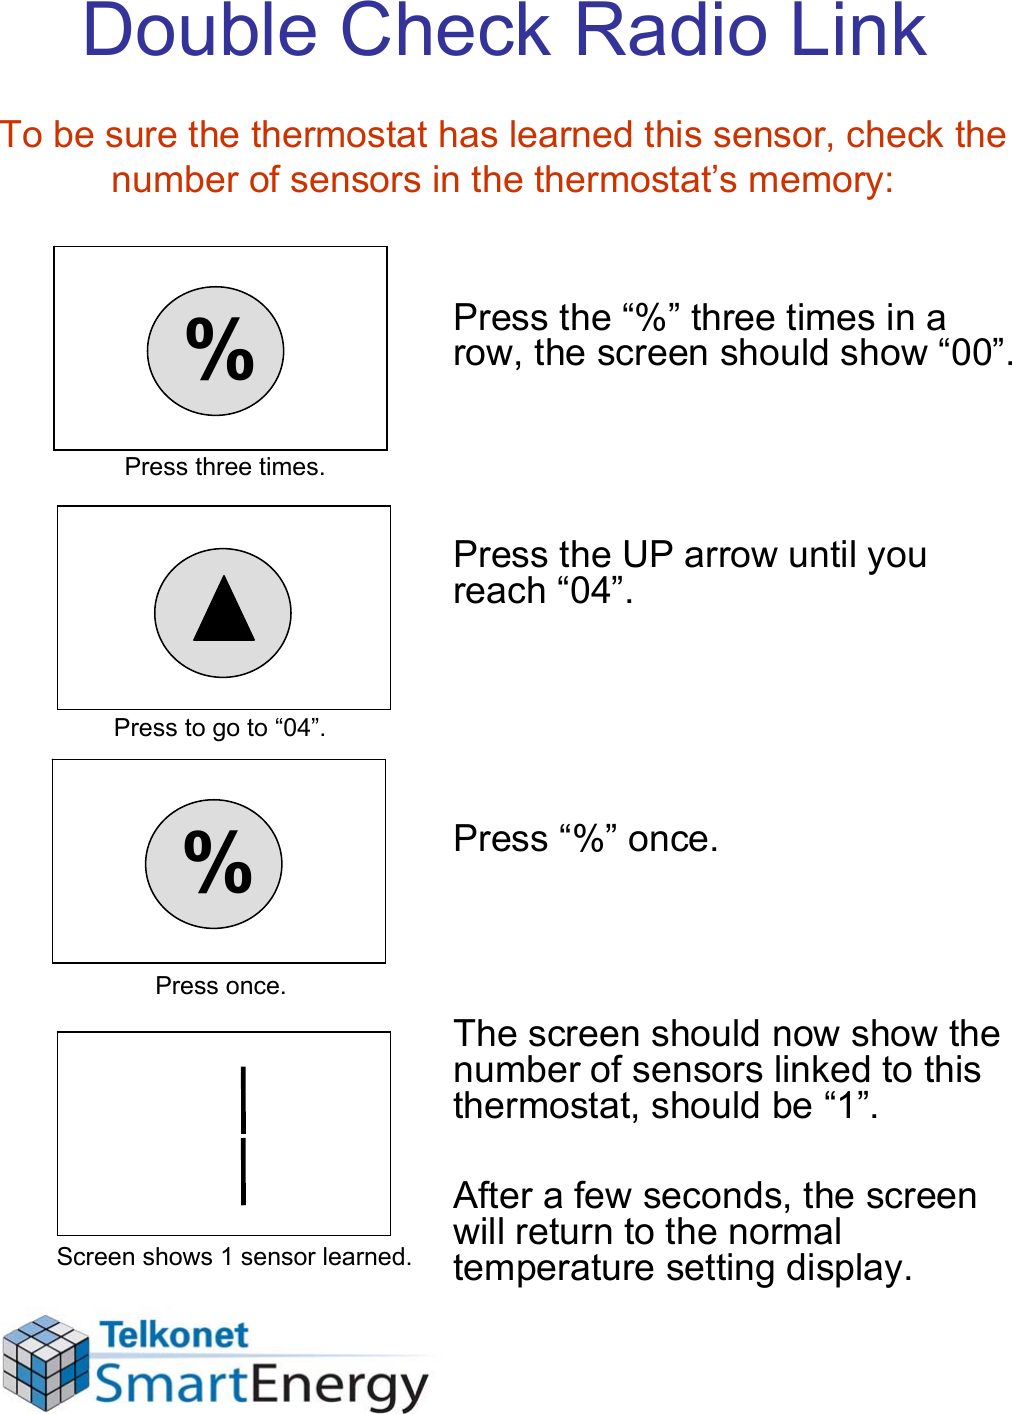 Double Check Radio Link%Press three times.Press to go to “04”.%Press once.Screen shows 1 sensor learned.Press the “%” three times in a row, the screen should show “00”. Press the UP arrow until you reach “04”.Press “%” once.The screen should now show the number of sensors linked to this thermostat, should be “1”.After a few seconds, the screen will return to the normal temperature setting display.To be sure the thermostat has learned this sensor, check the number of sensors in the thermostat’s memory: